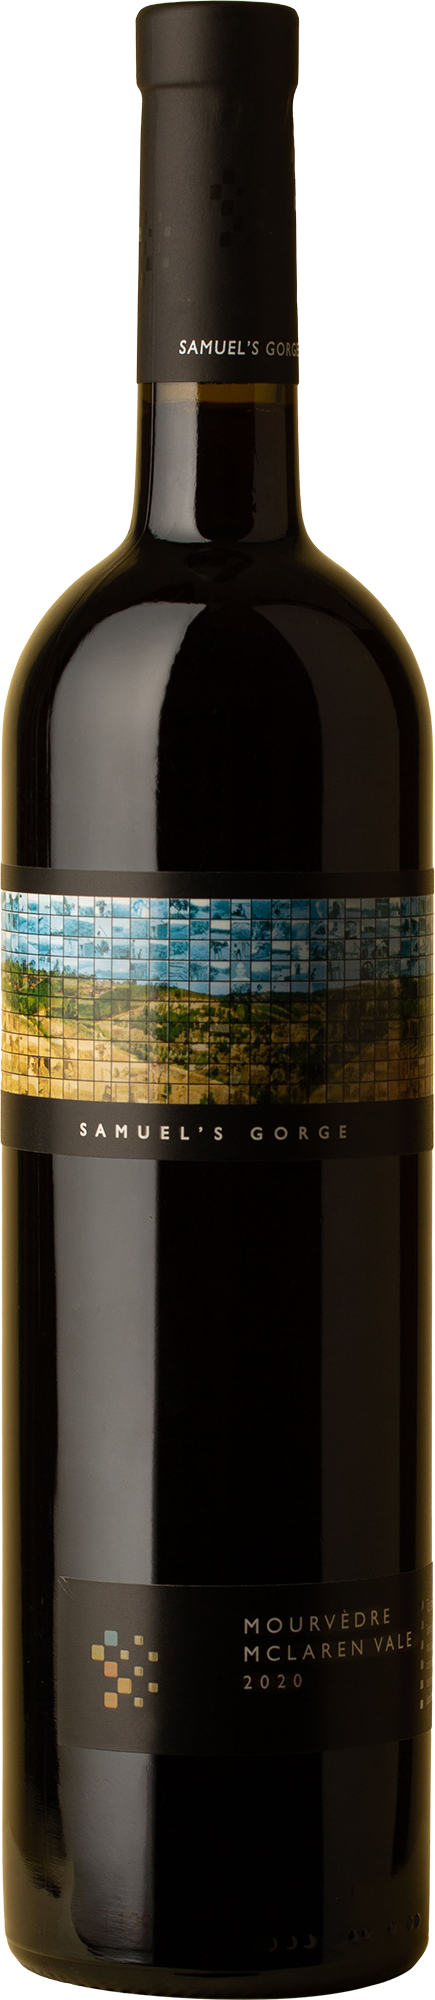 Samuel's Gorge - Mourvedre 2020 Red Wine